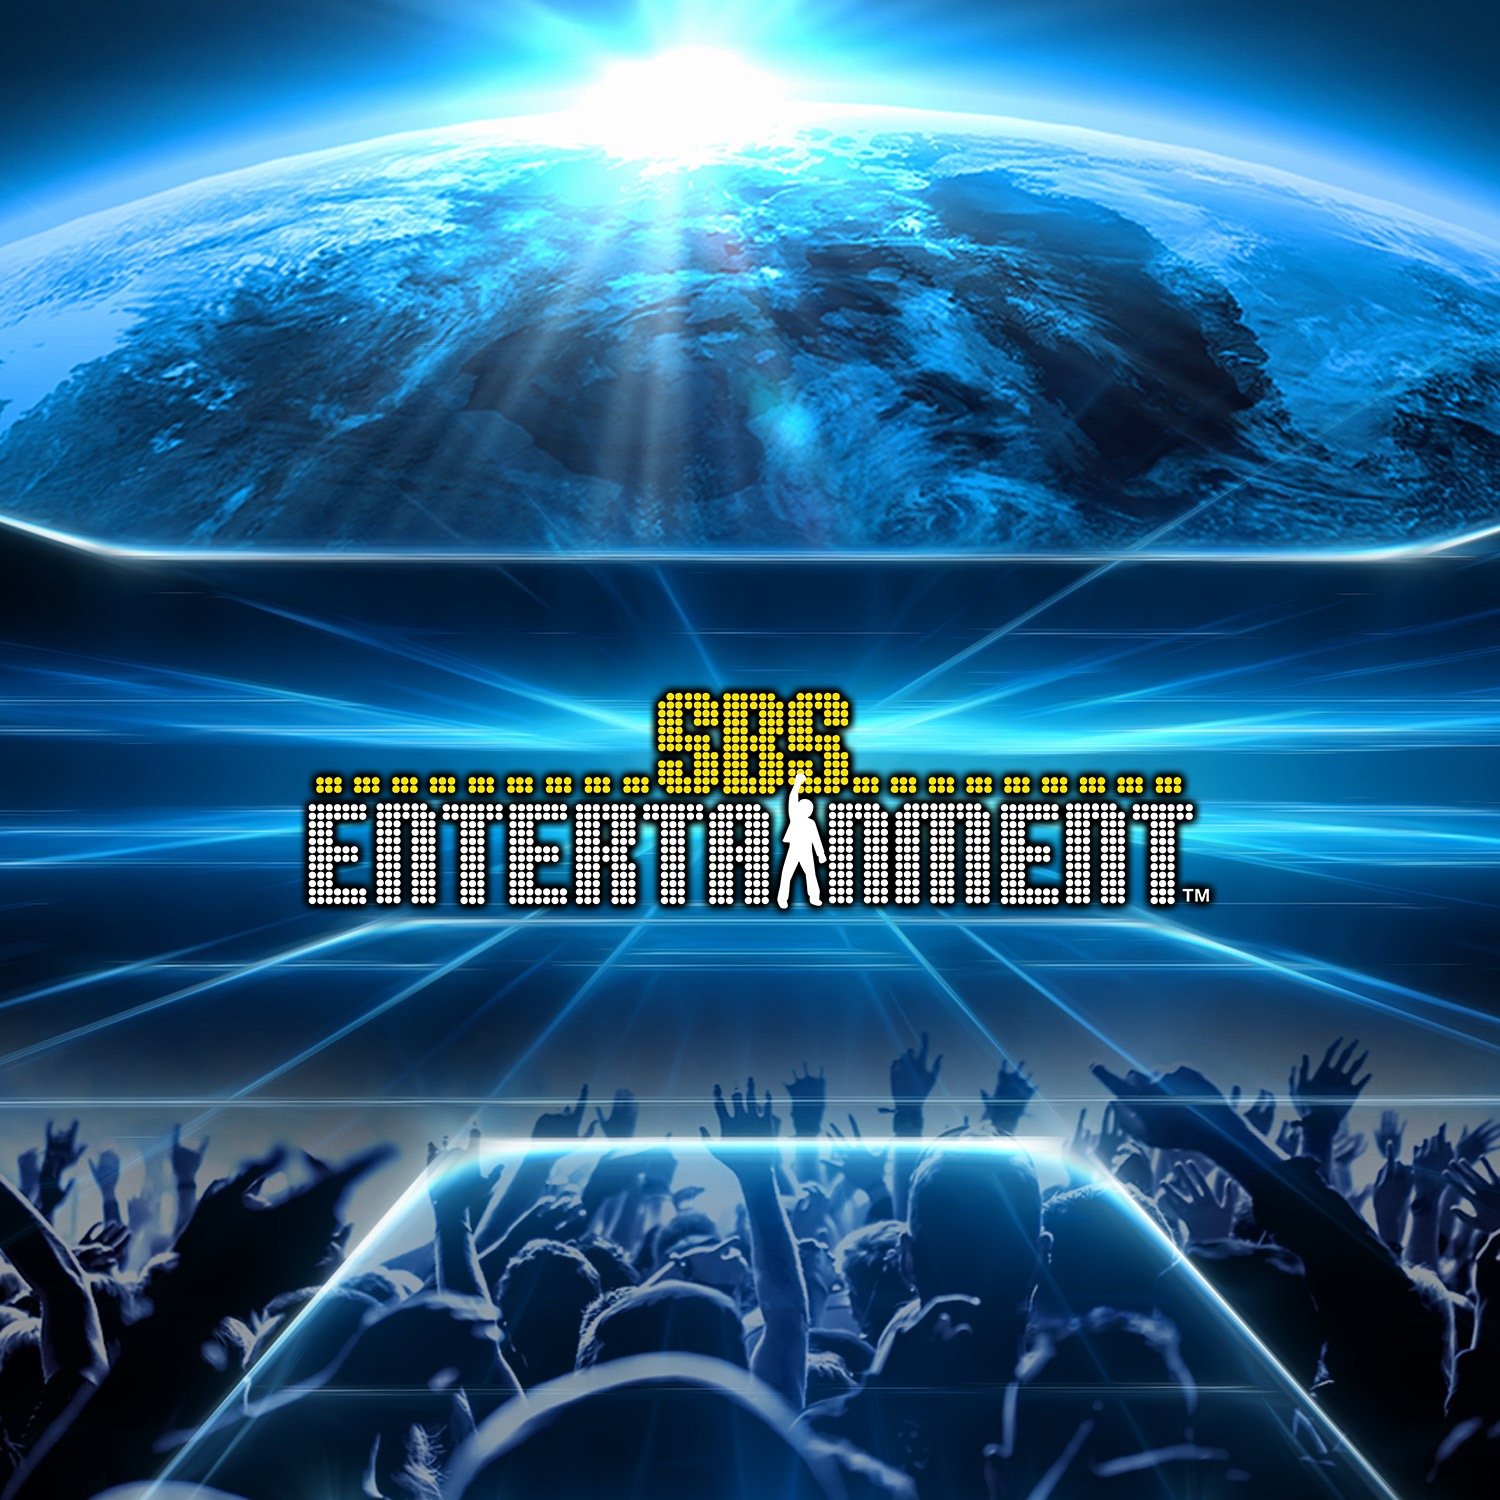 Leading company in the production of events and epic concerts.
By: Spanish Broadcasting System. #SBSEntertainment